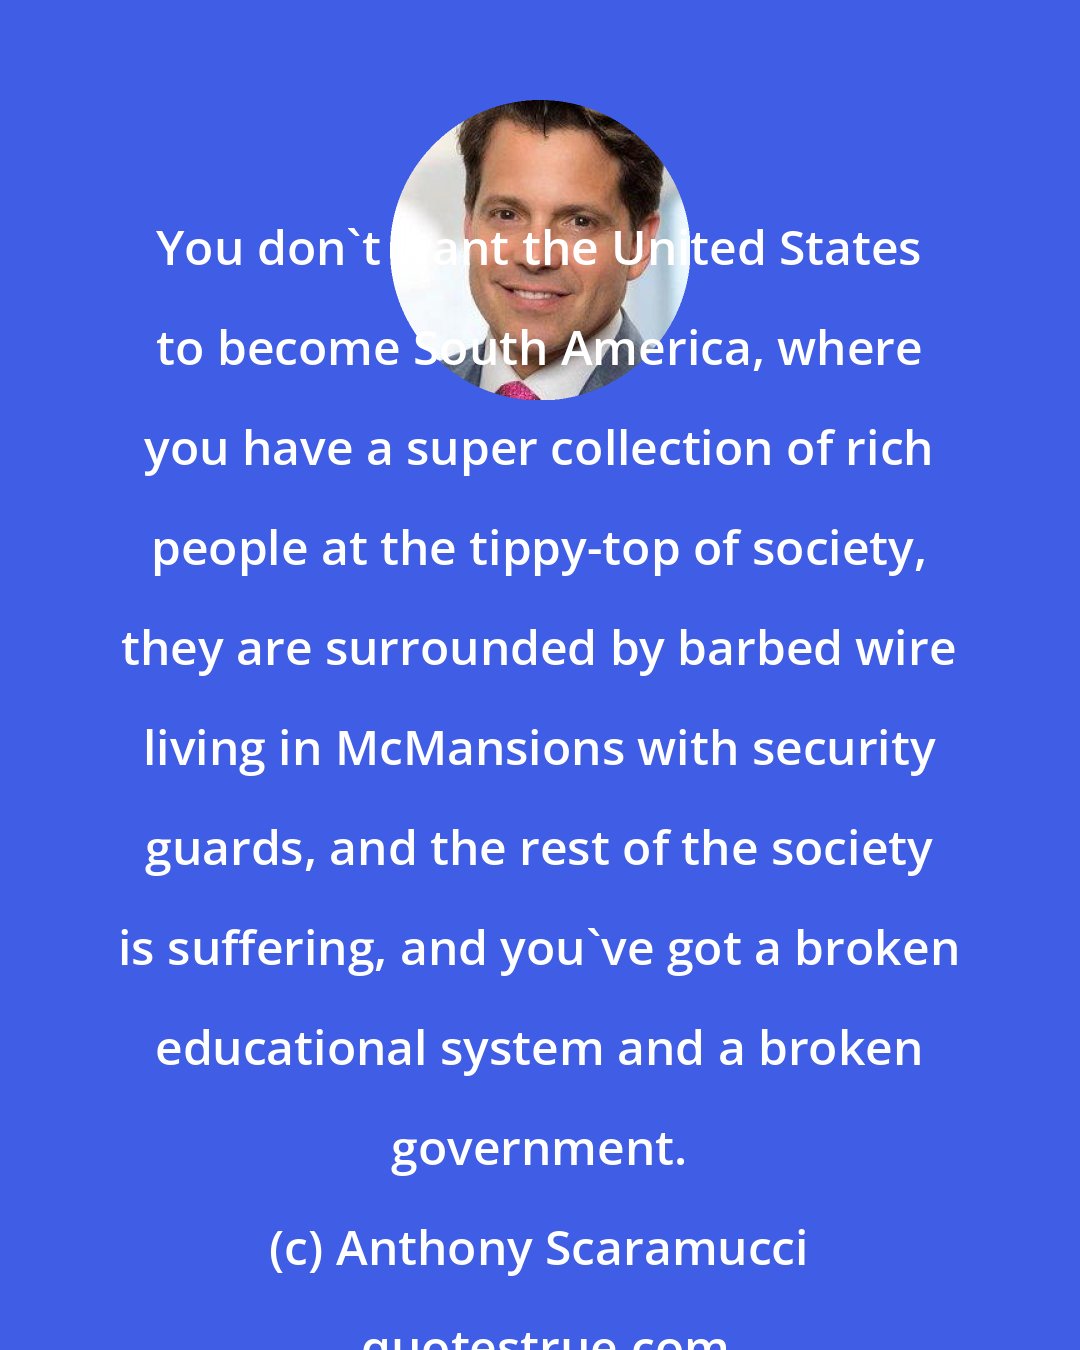 Anthony Scaramucci: You don't want the United States to become South America, where you have a super collection of rich people at the tippy-top of society, they are surrounded by barbed wire living in McMansions with security guards, and the rest of the society is suffering, and you've got a broken educational system and a broken government.